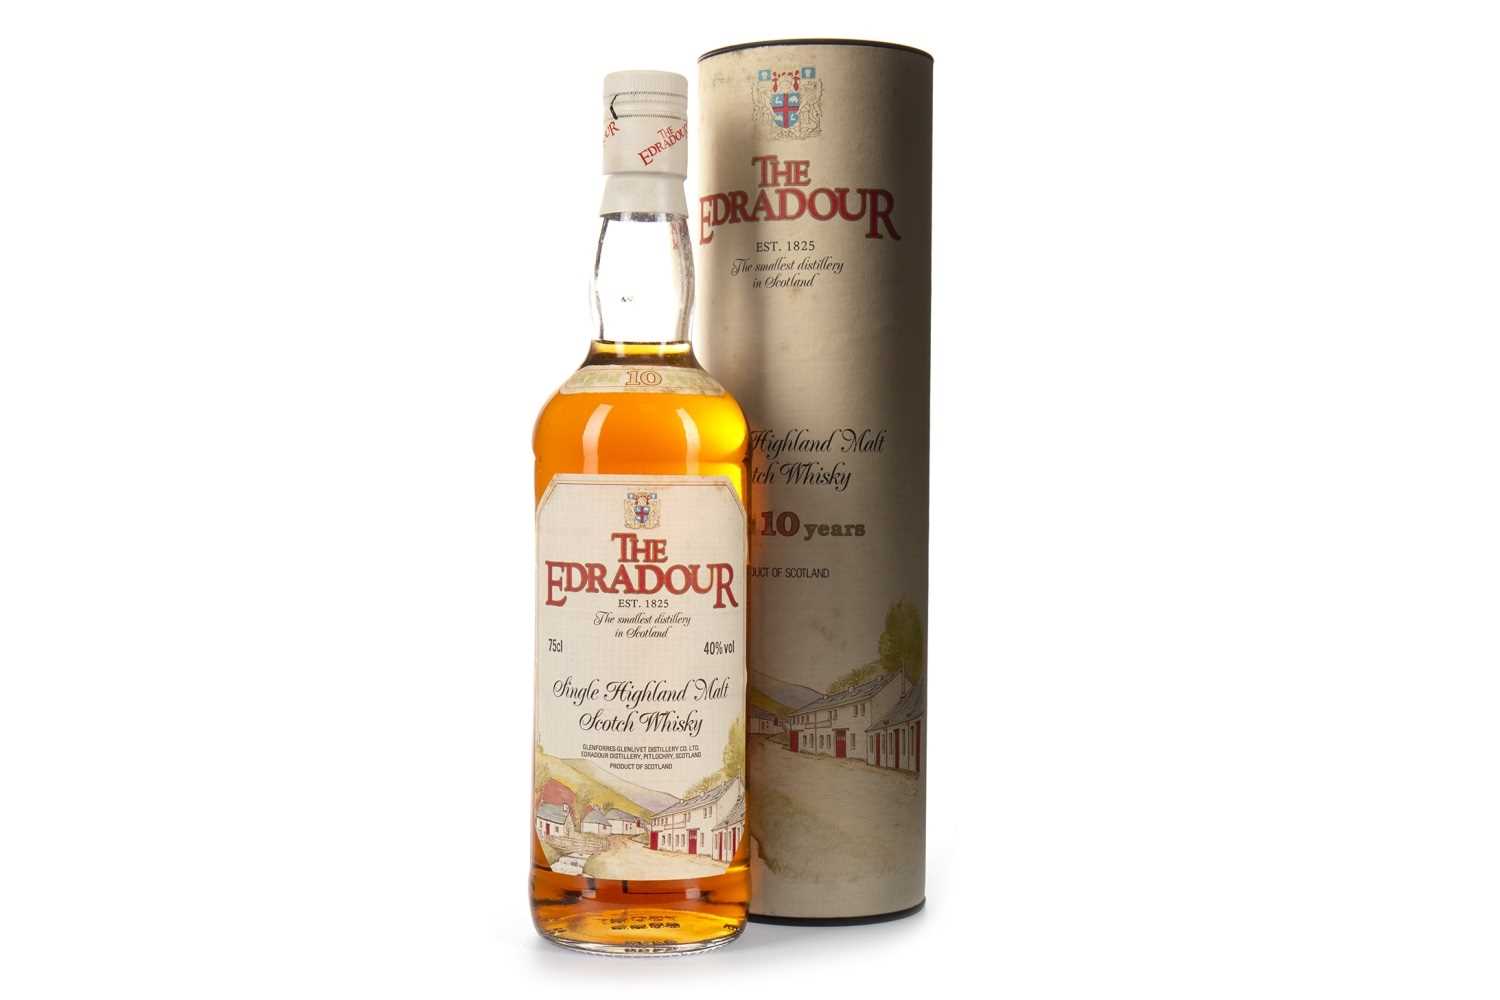 Lot 31 - EDRADOUR AGED 10 YEARS